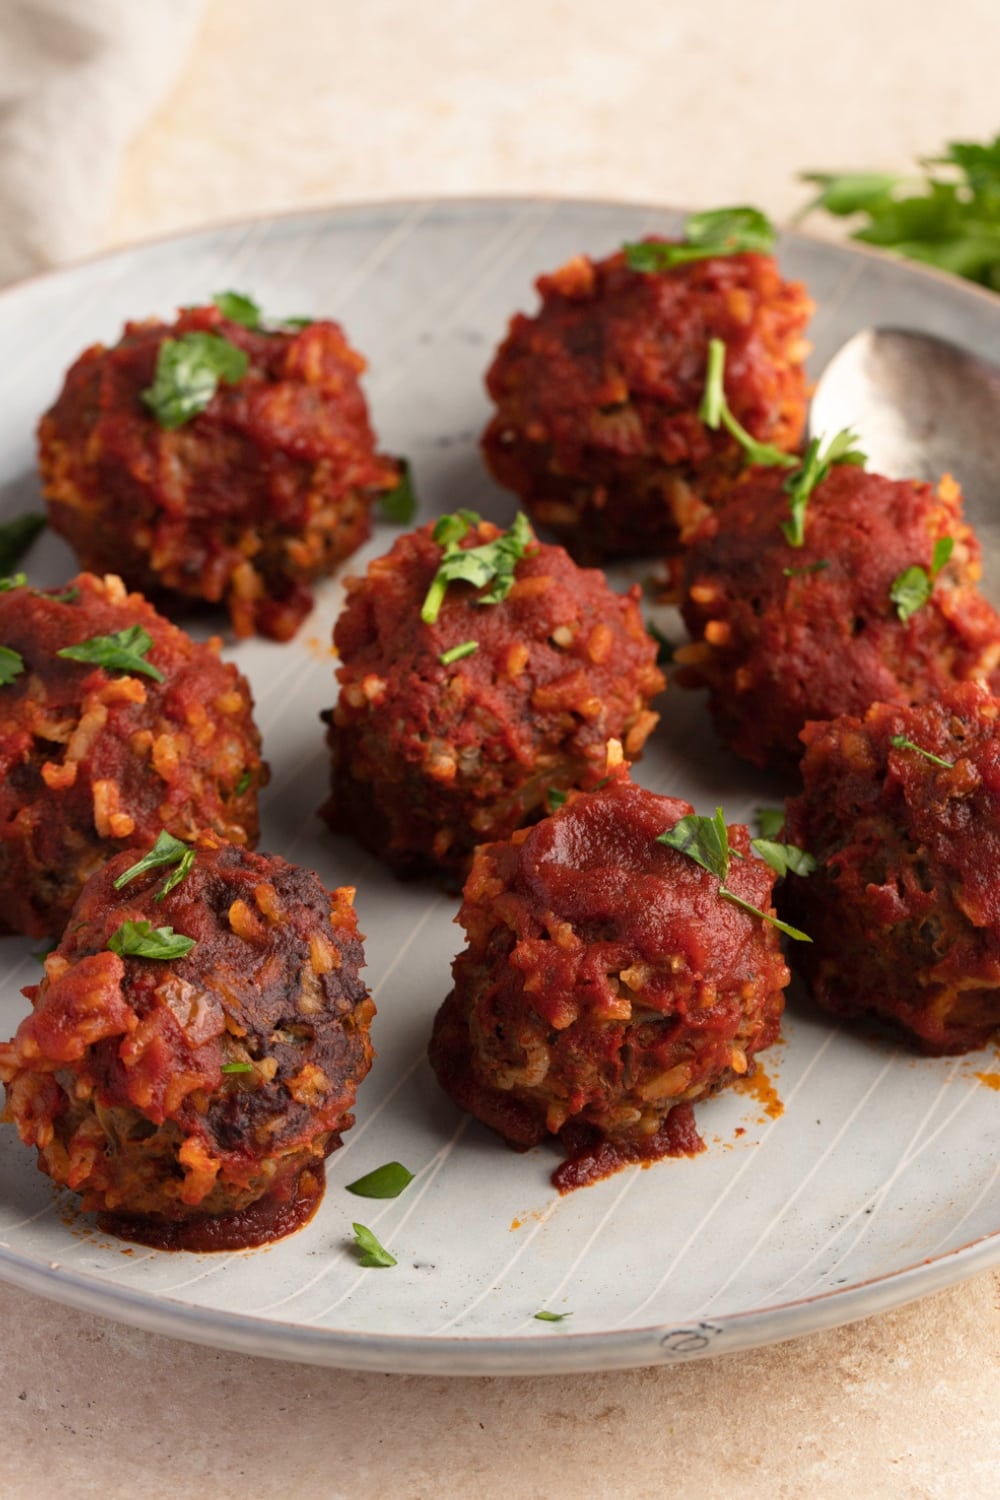 Appetizing Porcupine Meatballs with Herbs